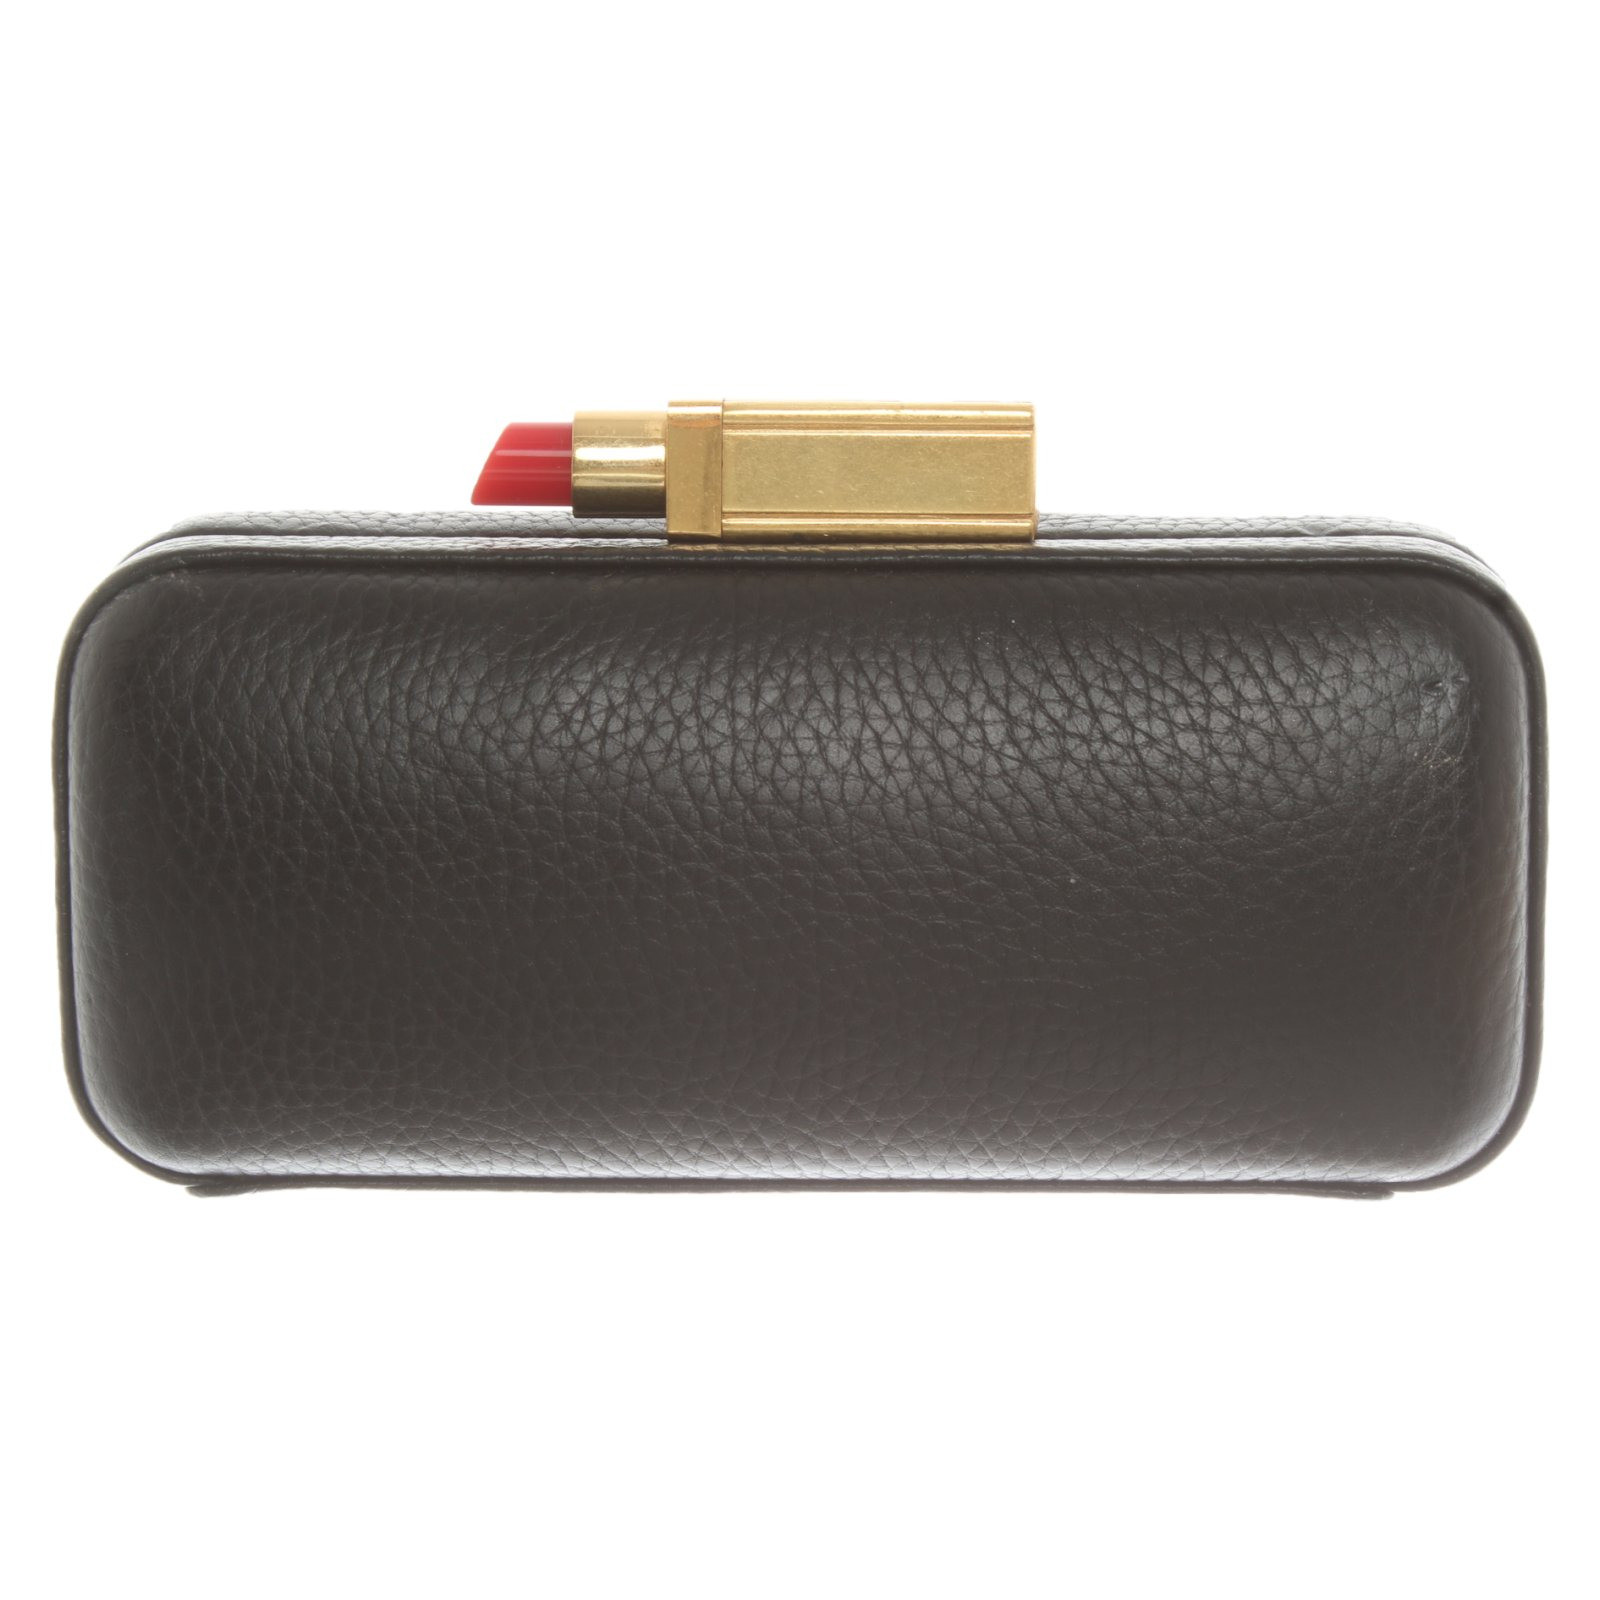 Lulu Guinness Clutch Bag Leather in Black - Second Hand Lulu Guinness  Clutch Bag Leather in Black buy used for 100€ (5854168)